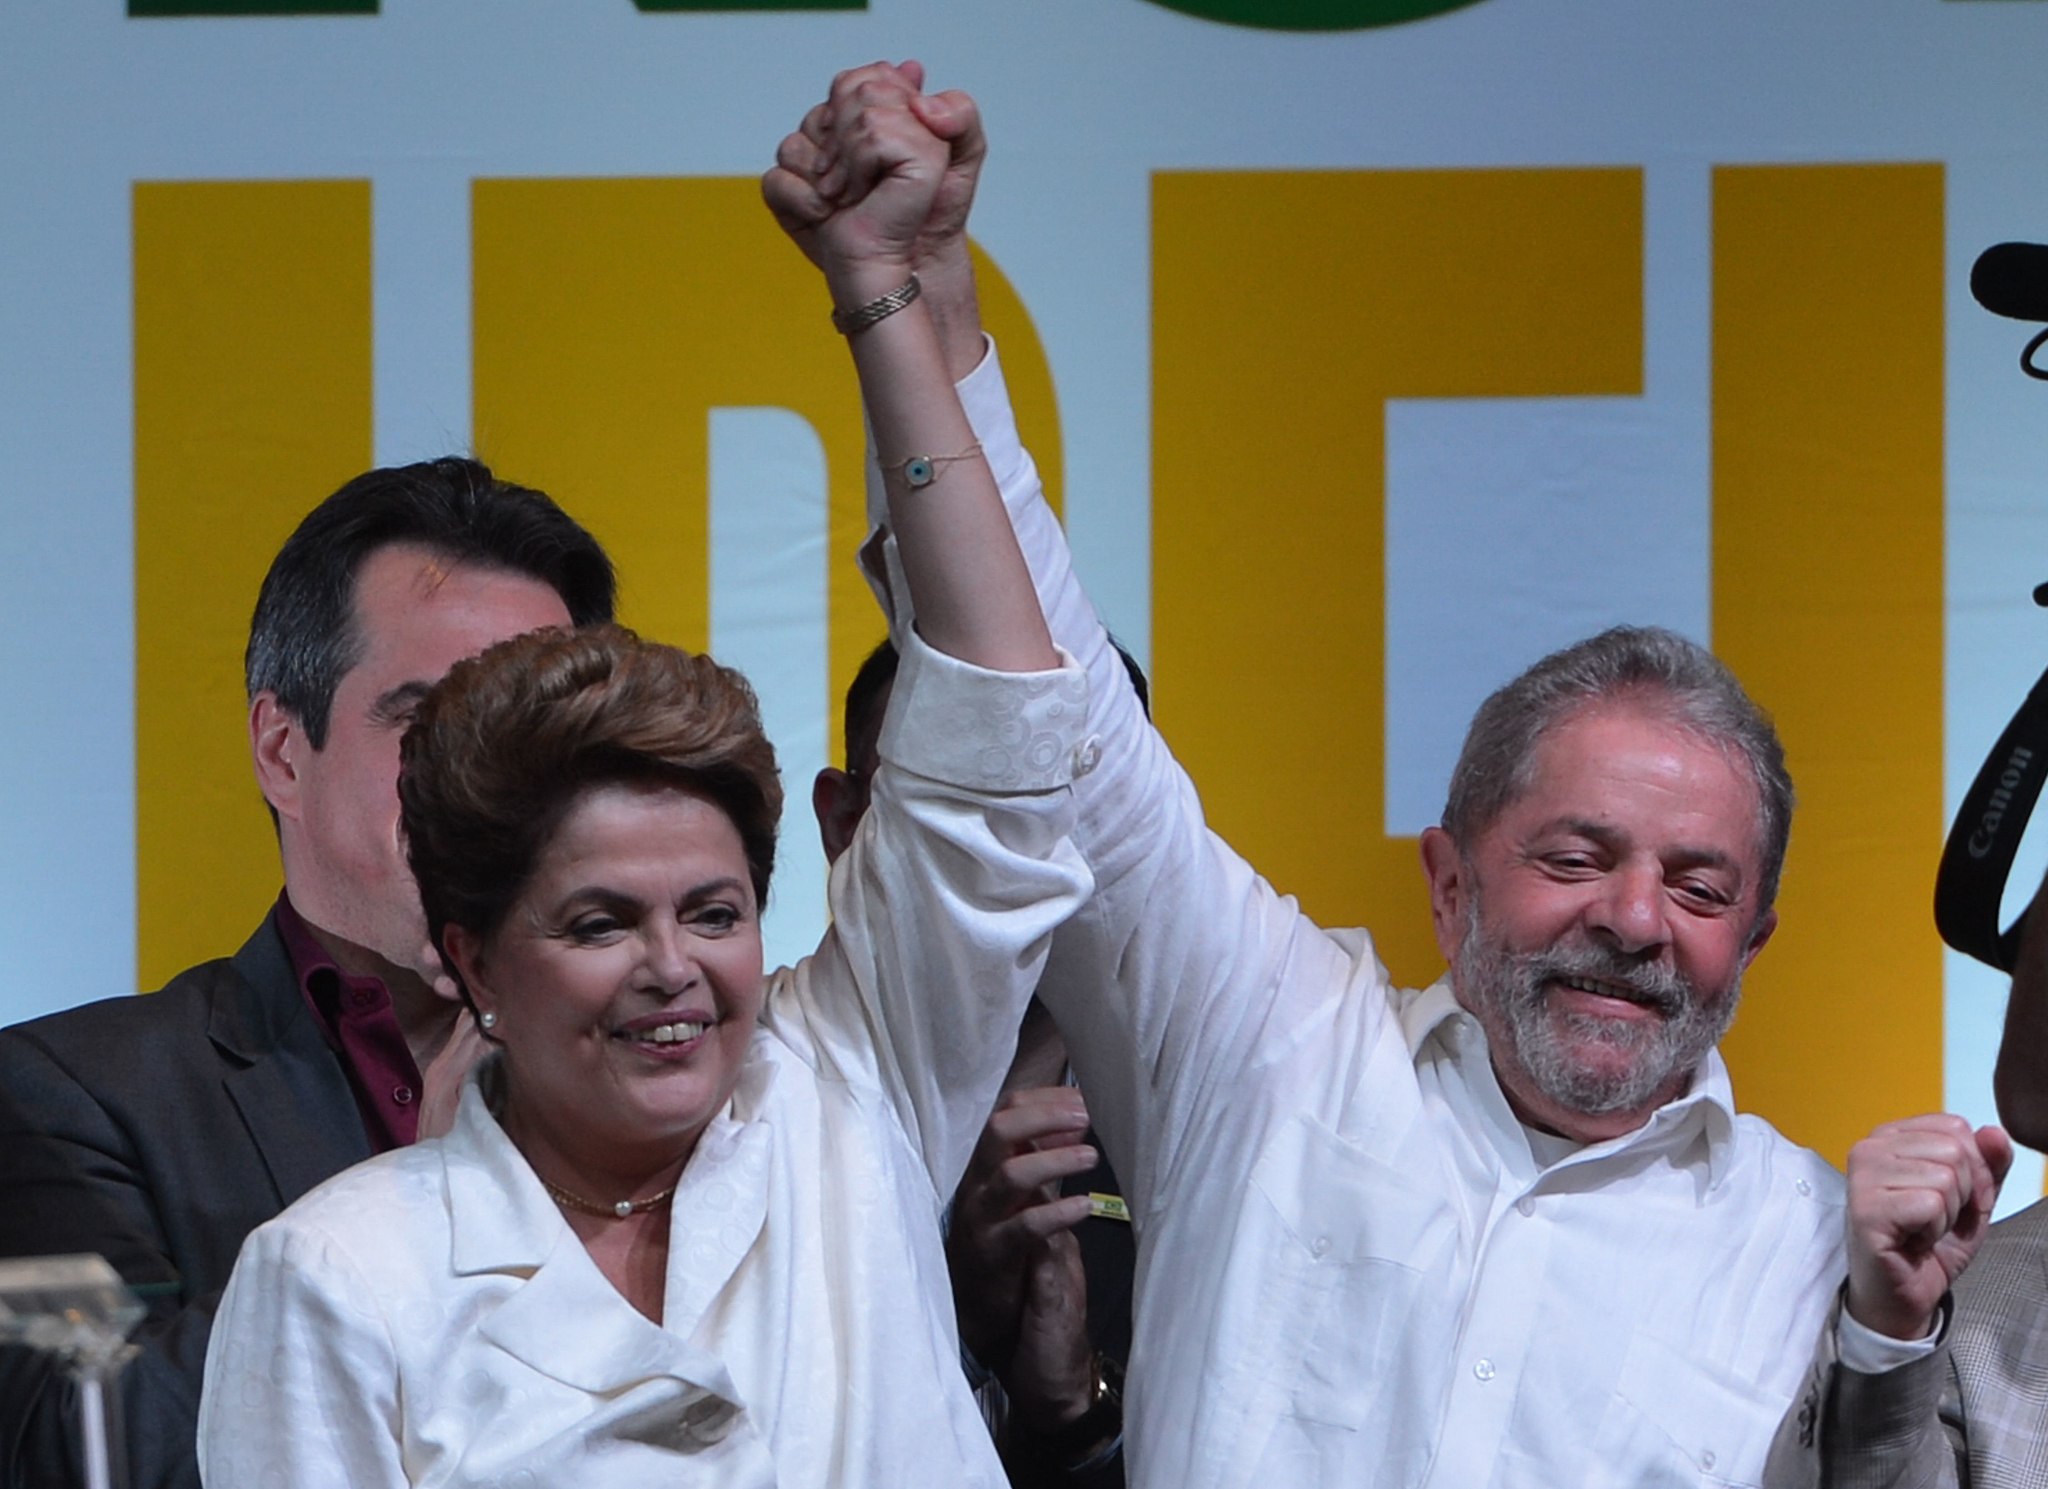 Lula (right), pictured with now-deposed President Dilma Rousseff after her election. Photo: Fabio Rodrigues Pozzebom/Agência Brasil (Agência Brasil) [CC BY 3.0 br (http://creativecommons.org/licenses/by/3.0/br/deed.en)], via Wikimedia Commons